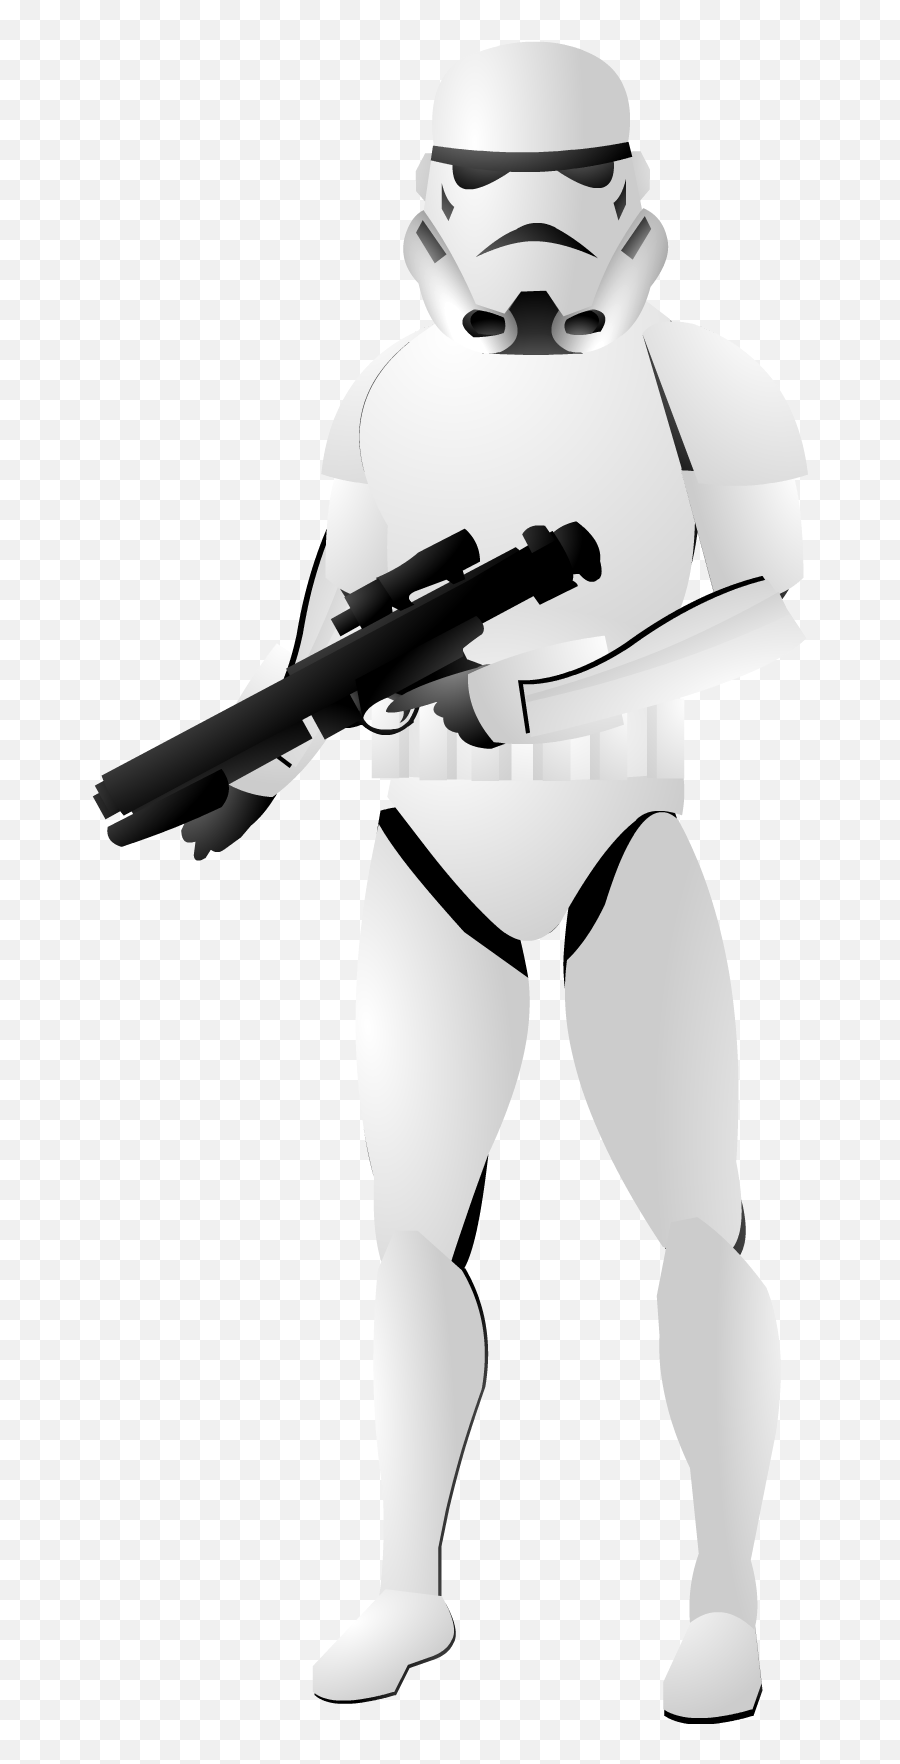 Stormtrooper Png Image For Free Download - Stormtrooper Pose Png,Storm Trooper Png